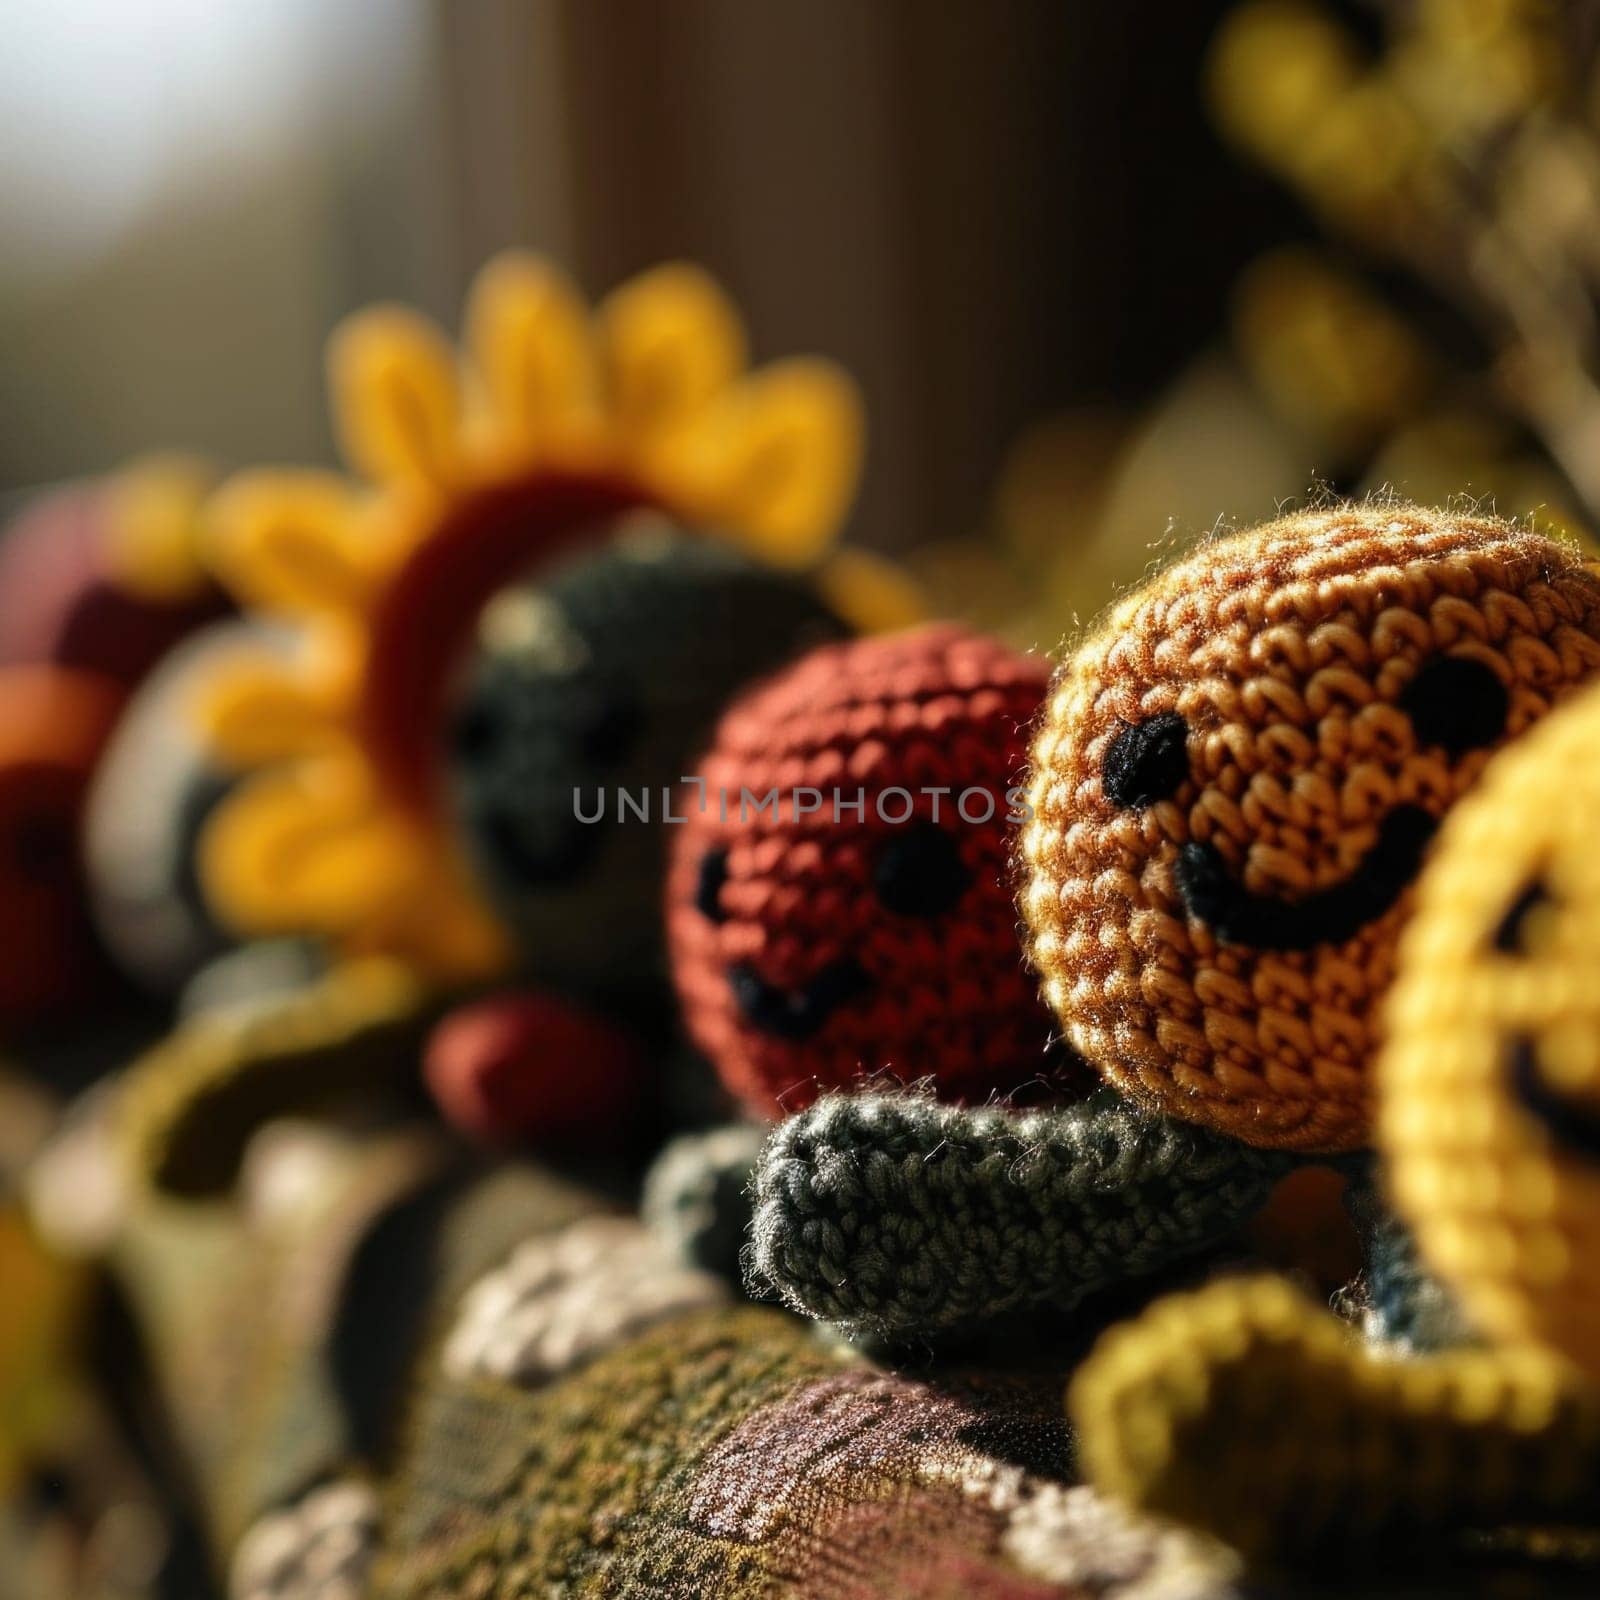 A row of crocheted stuffed animals are lined up on a table